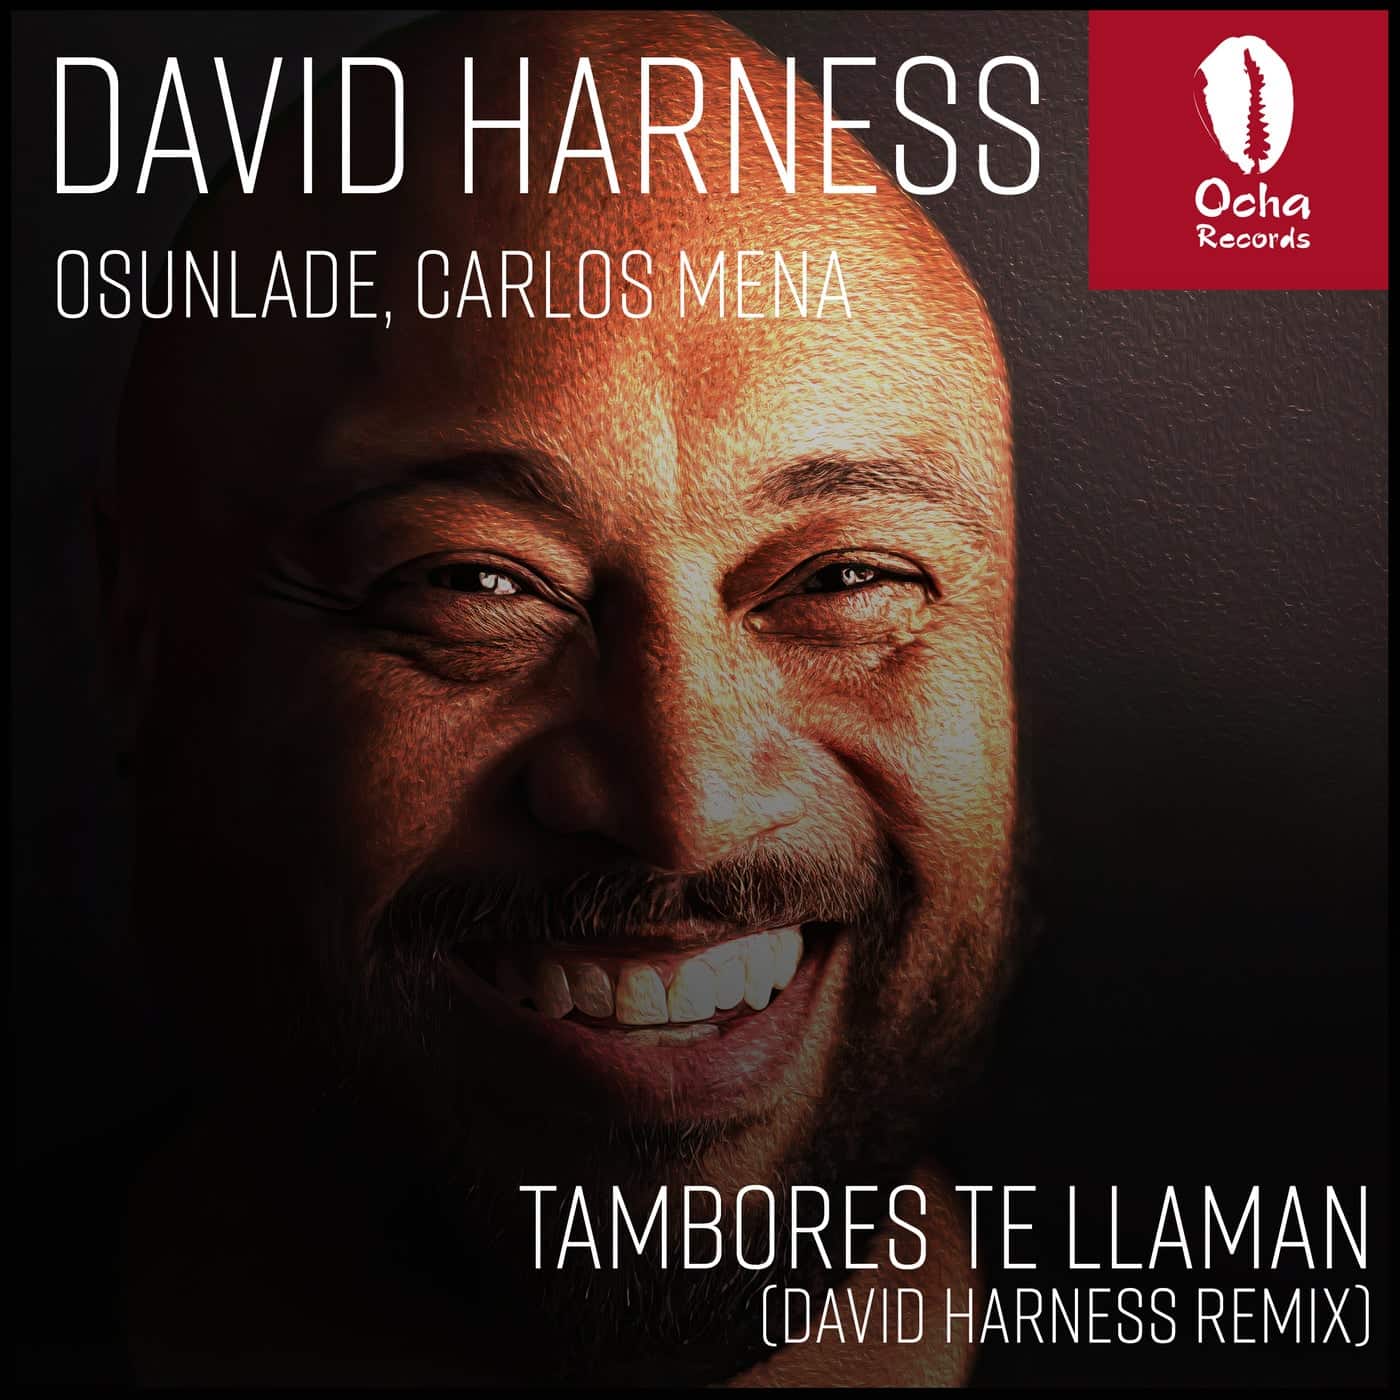 Release Cover: Tambores Te Llaman (David Harness Remix) Download Free on Electrobuzz